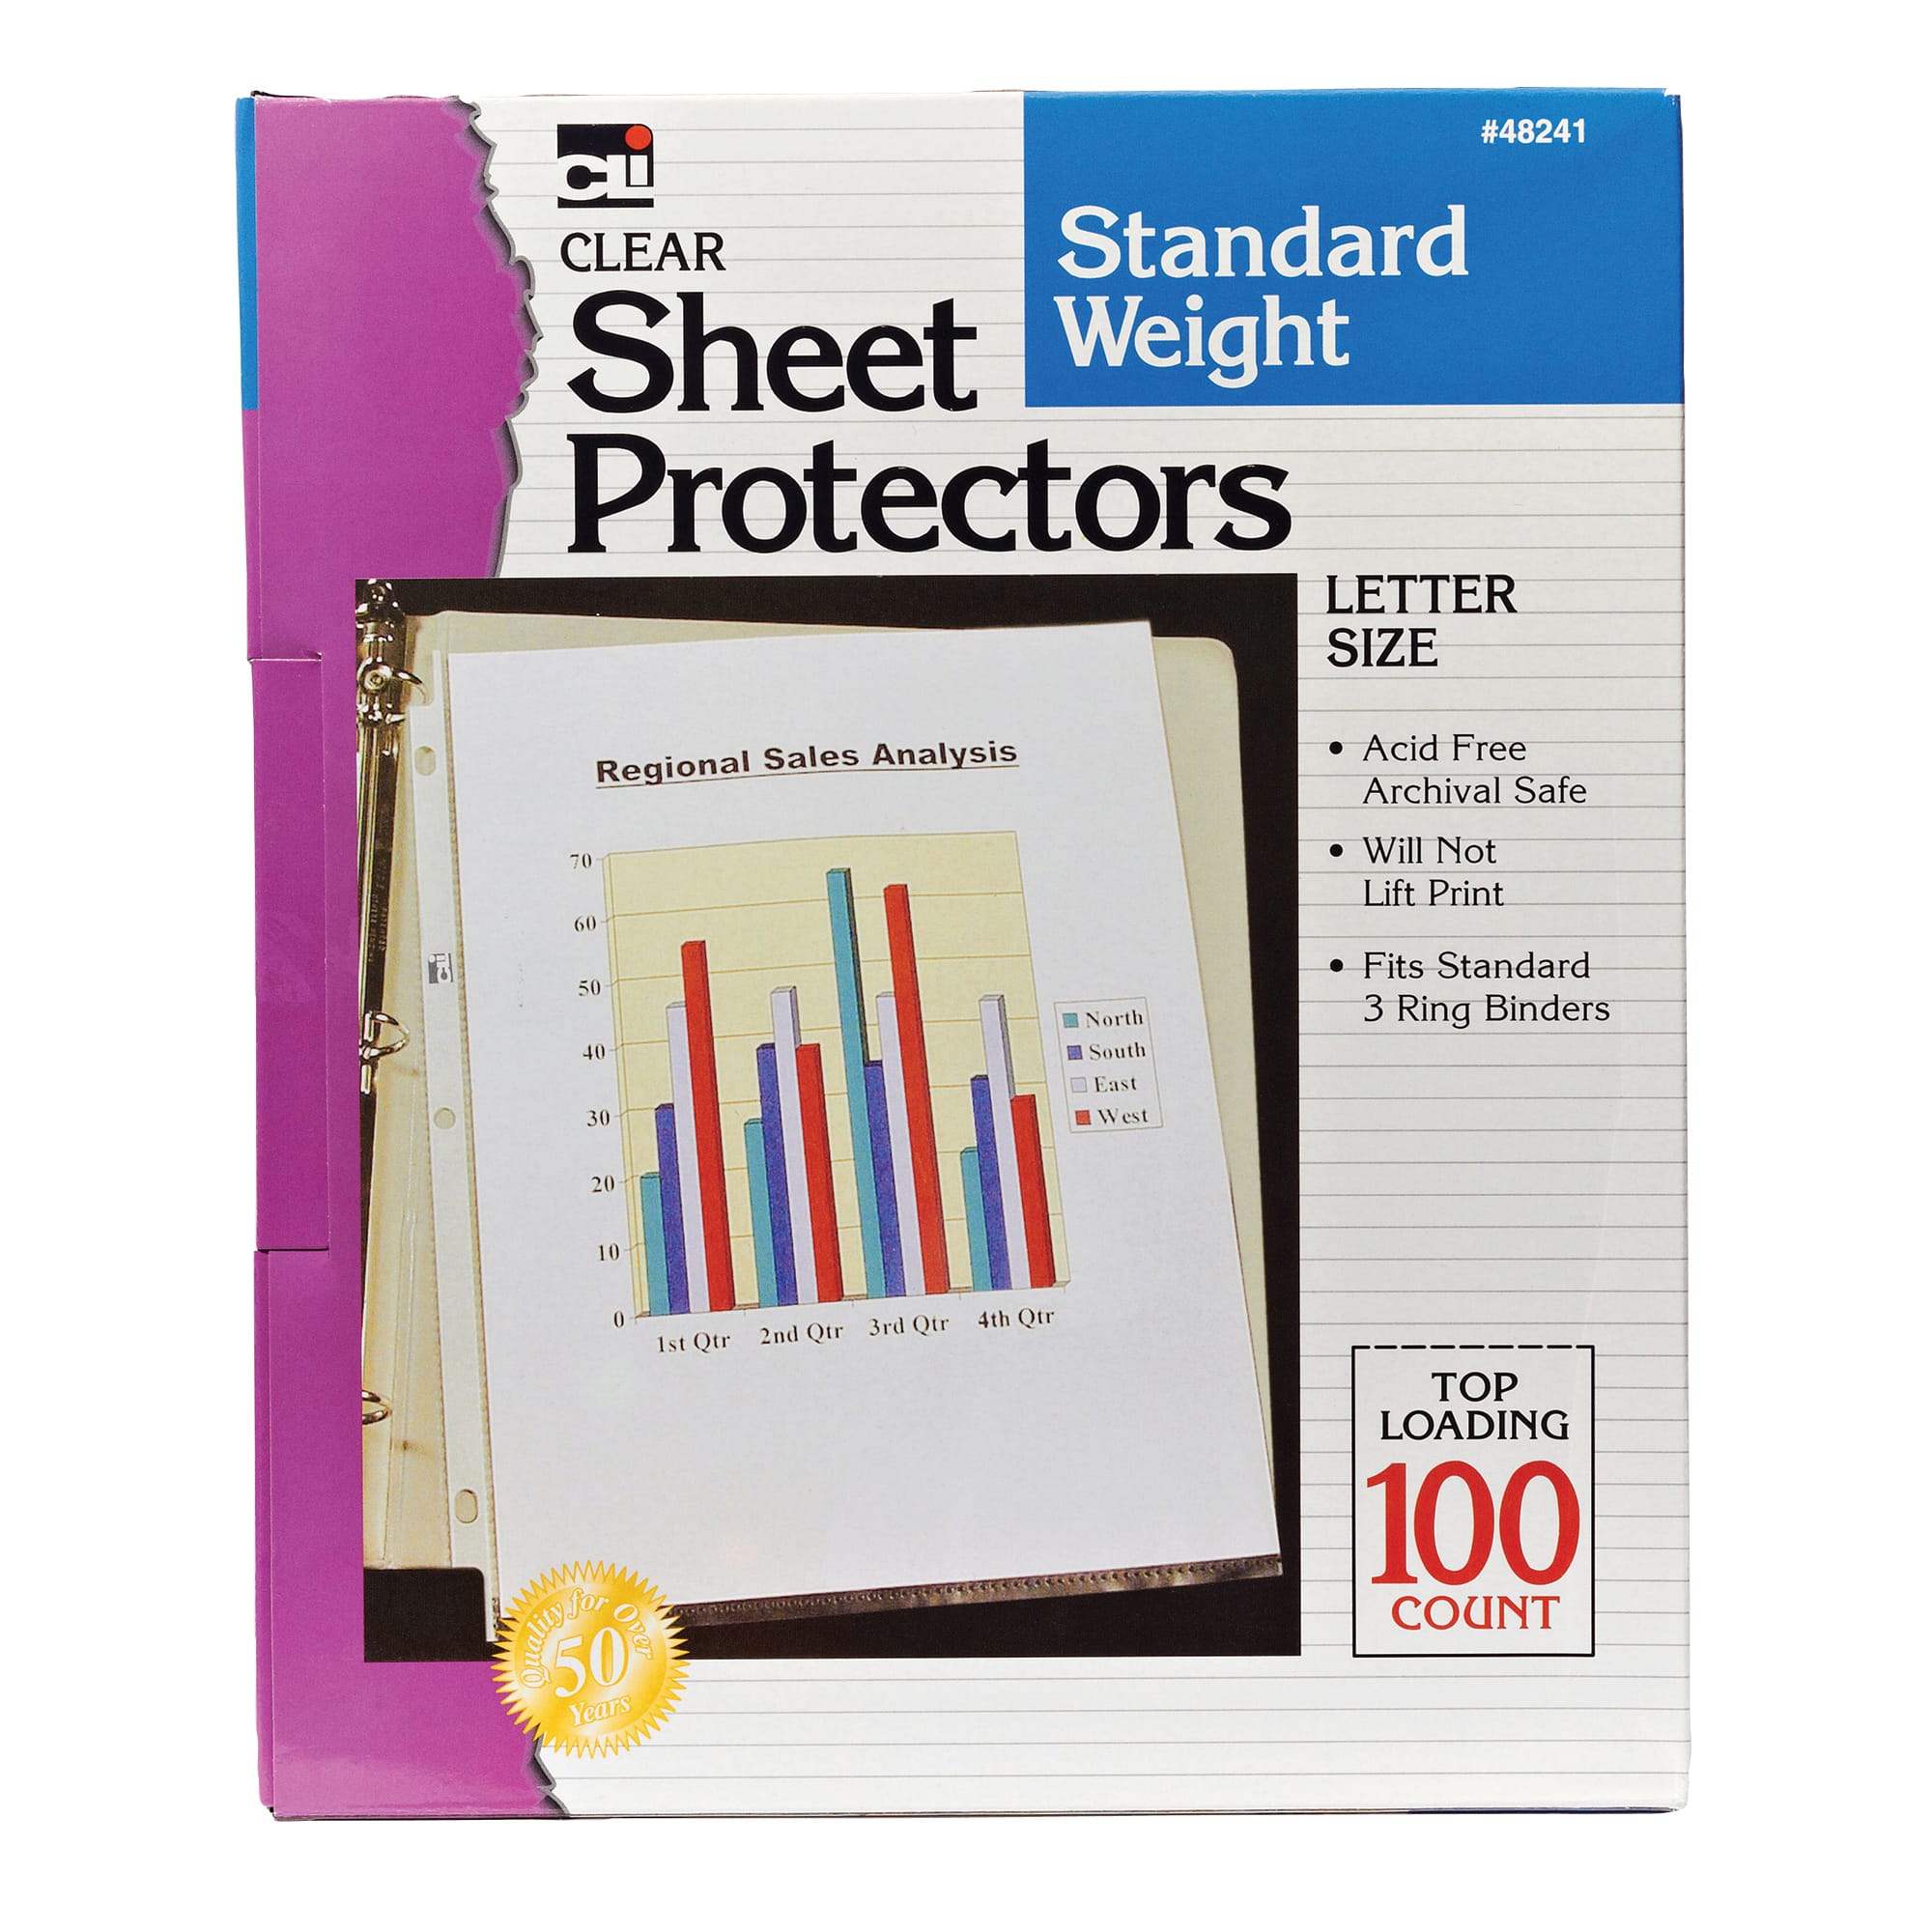 Clear Letter Size Standard Weight Sheet Protectors, Box of 100